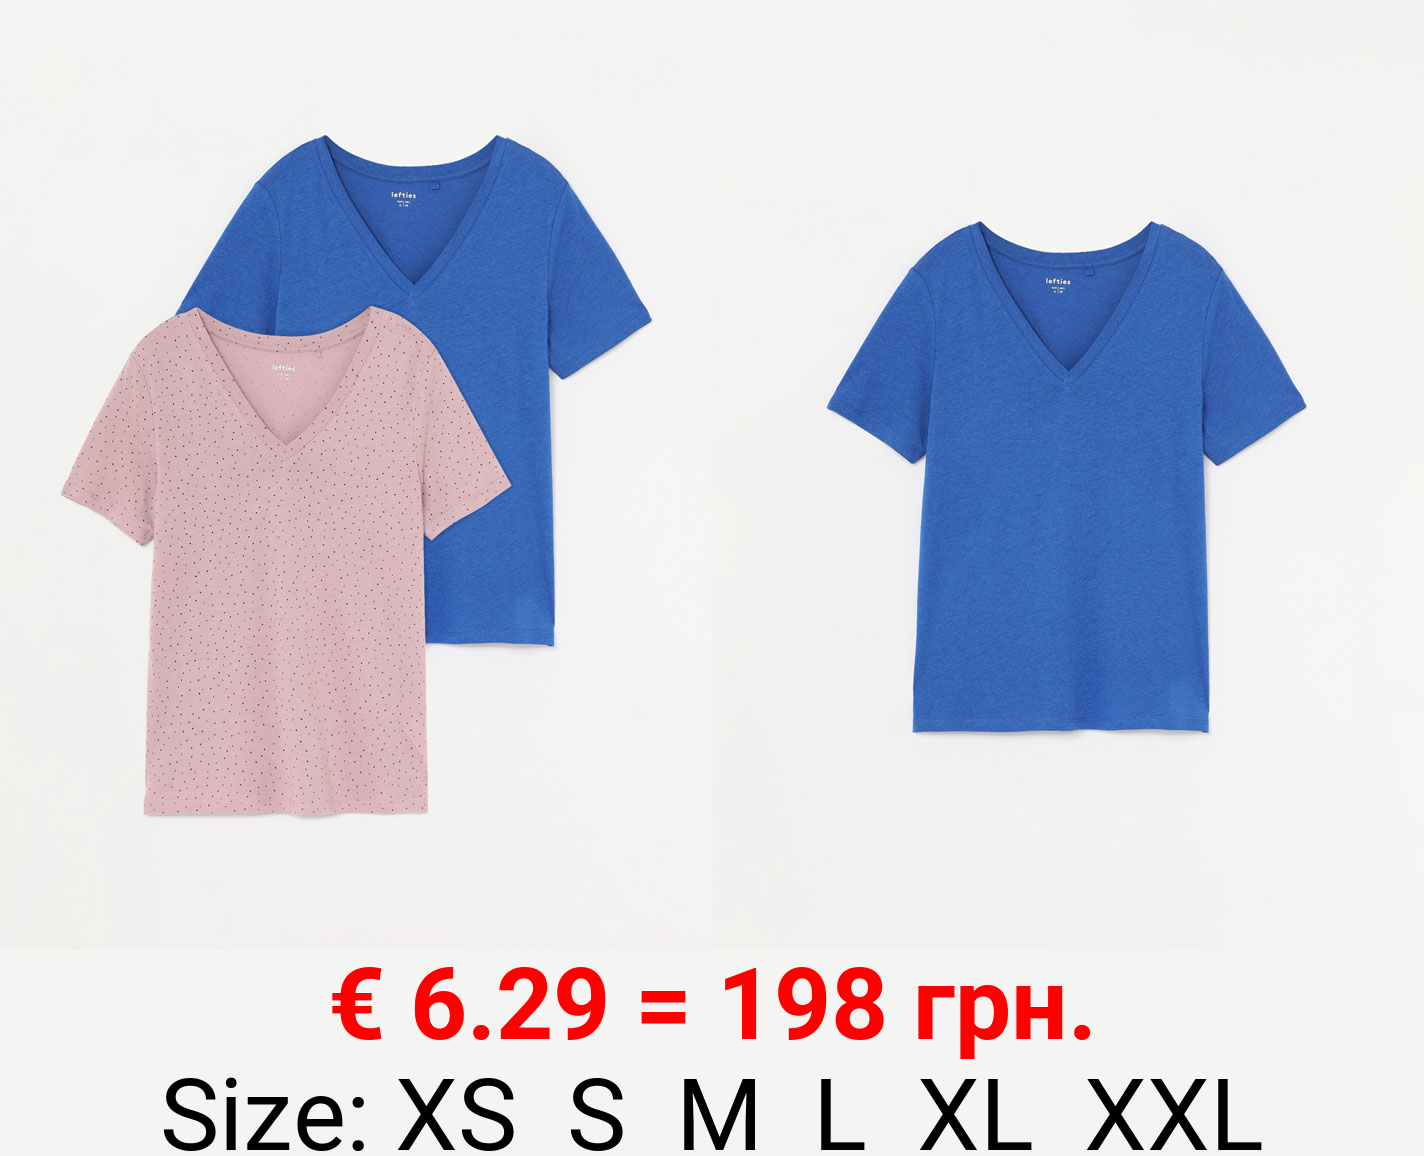 2-Pack of plain and printed V-neck T-shirts